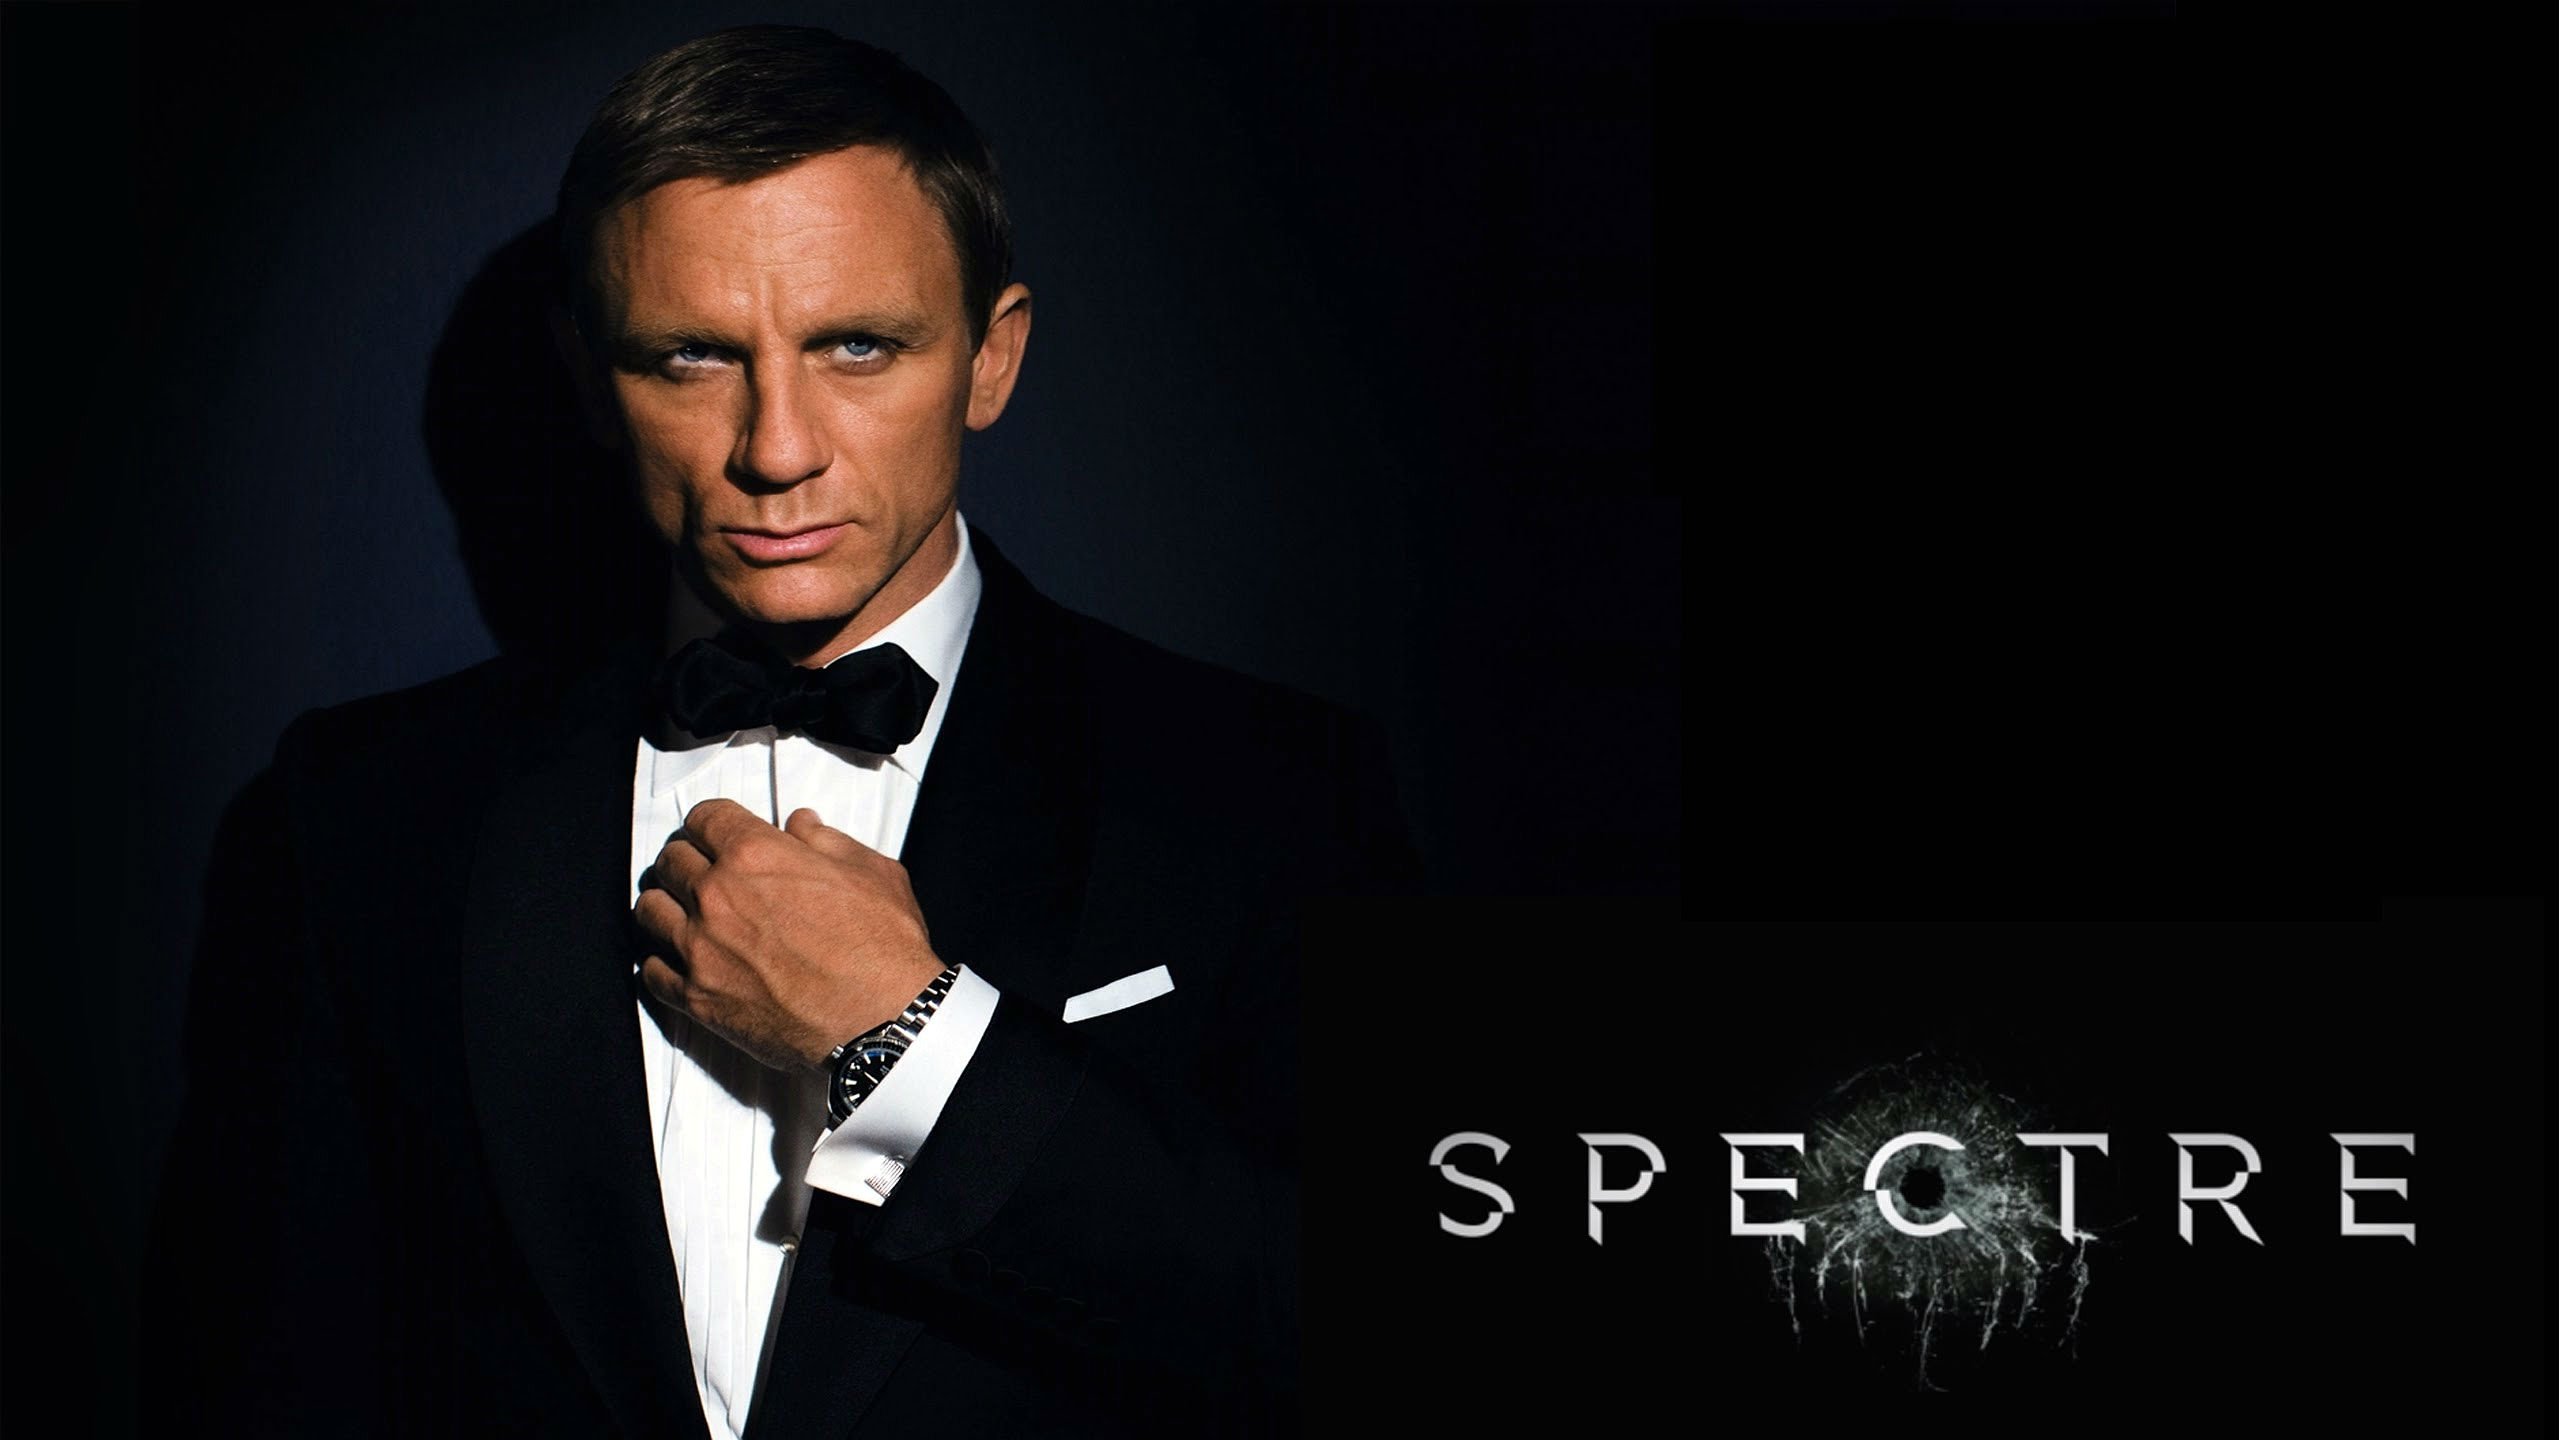 Spectre Win Tickets To See New James Bond Film At The Odeon